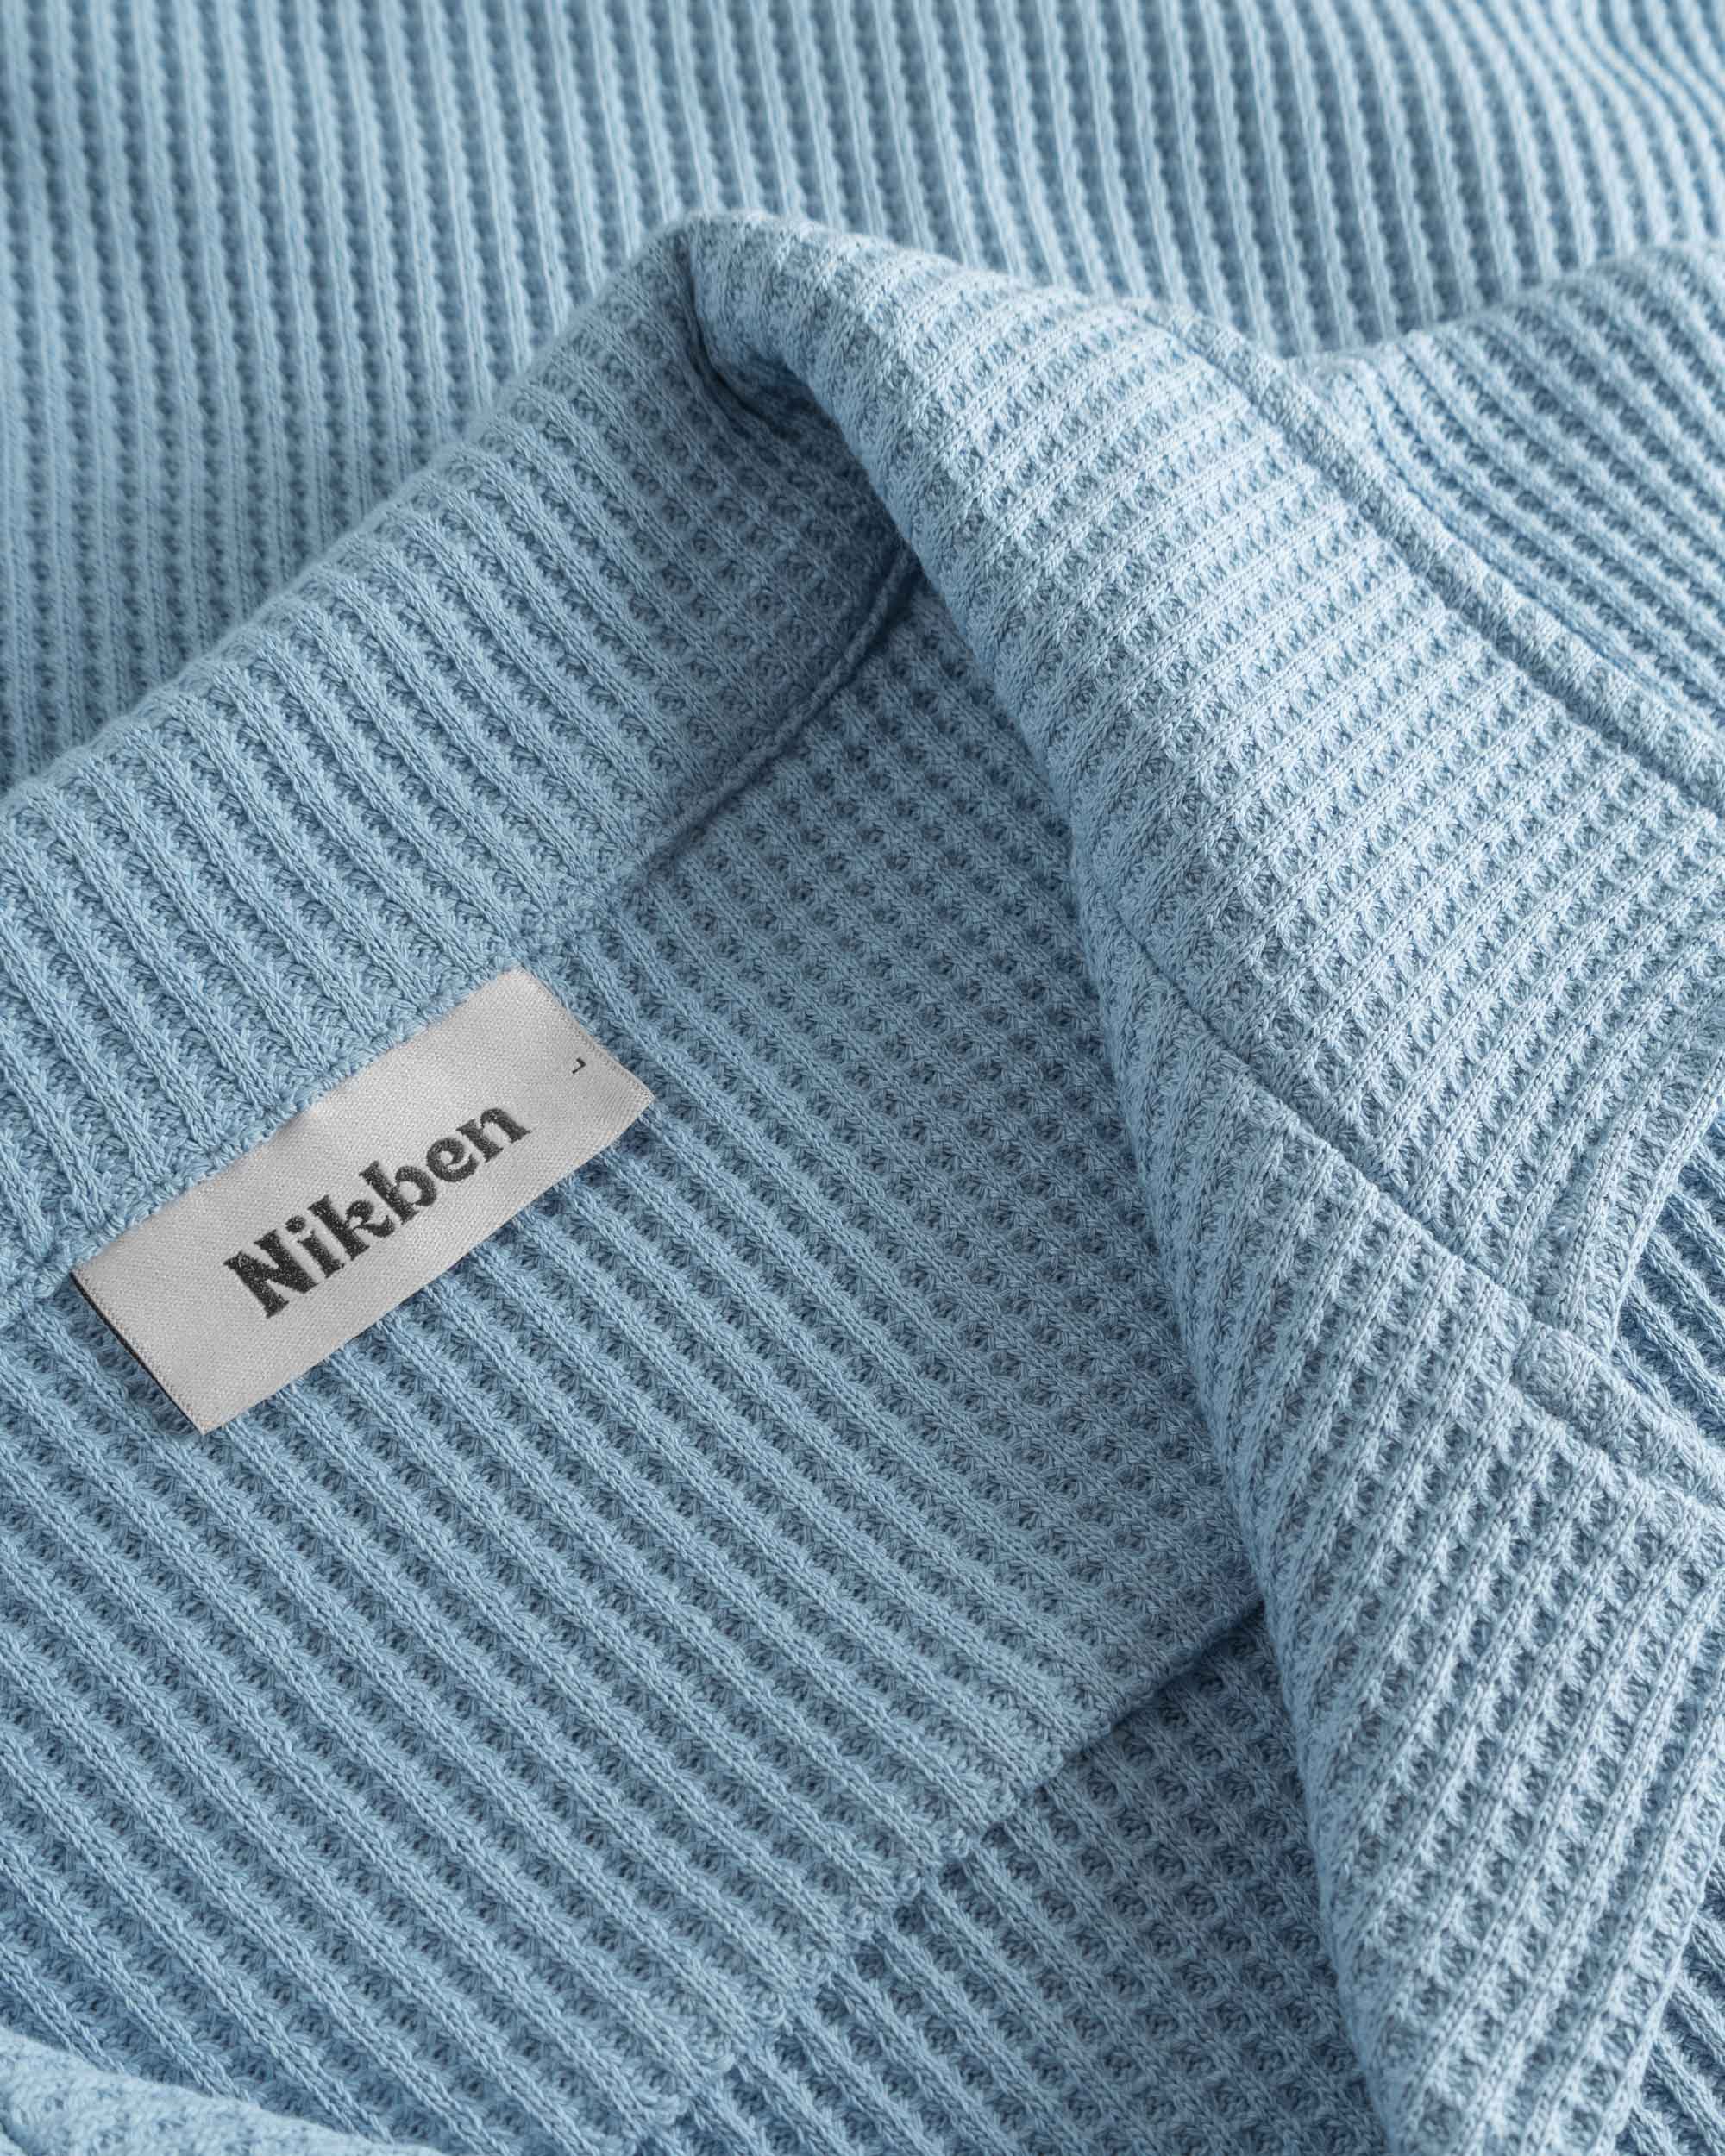 Close-up of open collar on a sky blue waffle-patterned shirt.